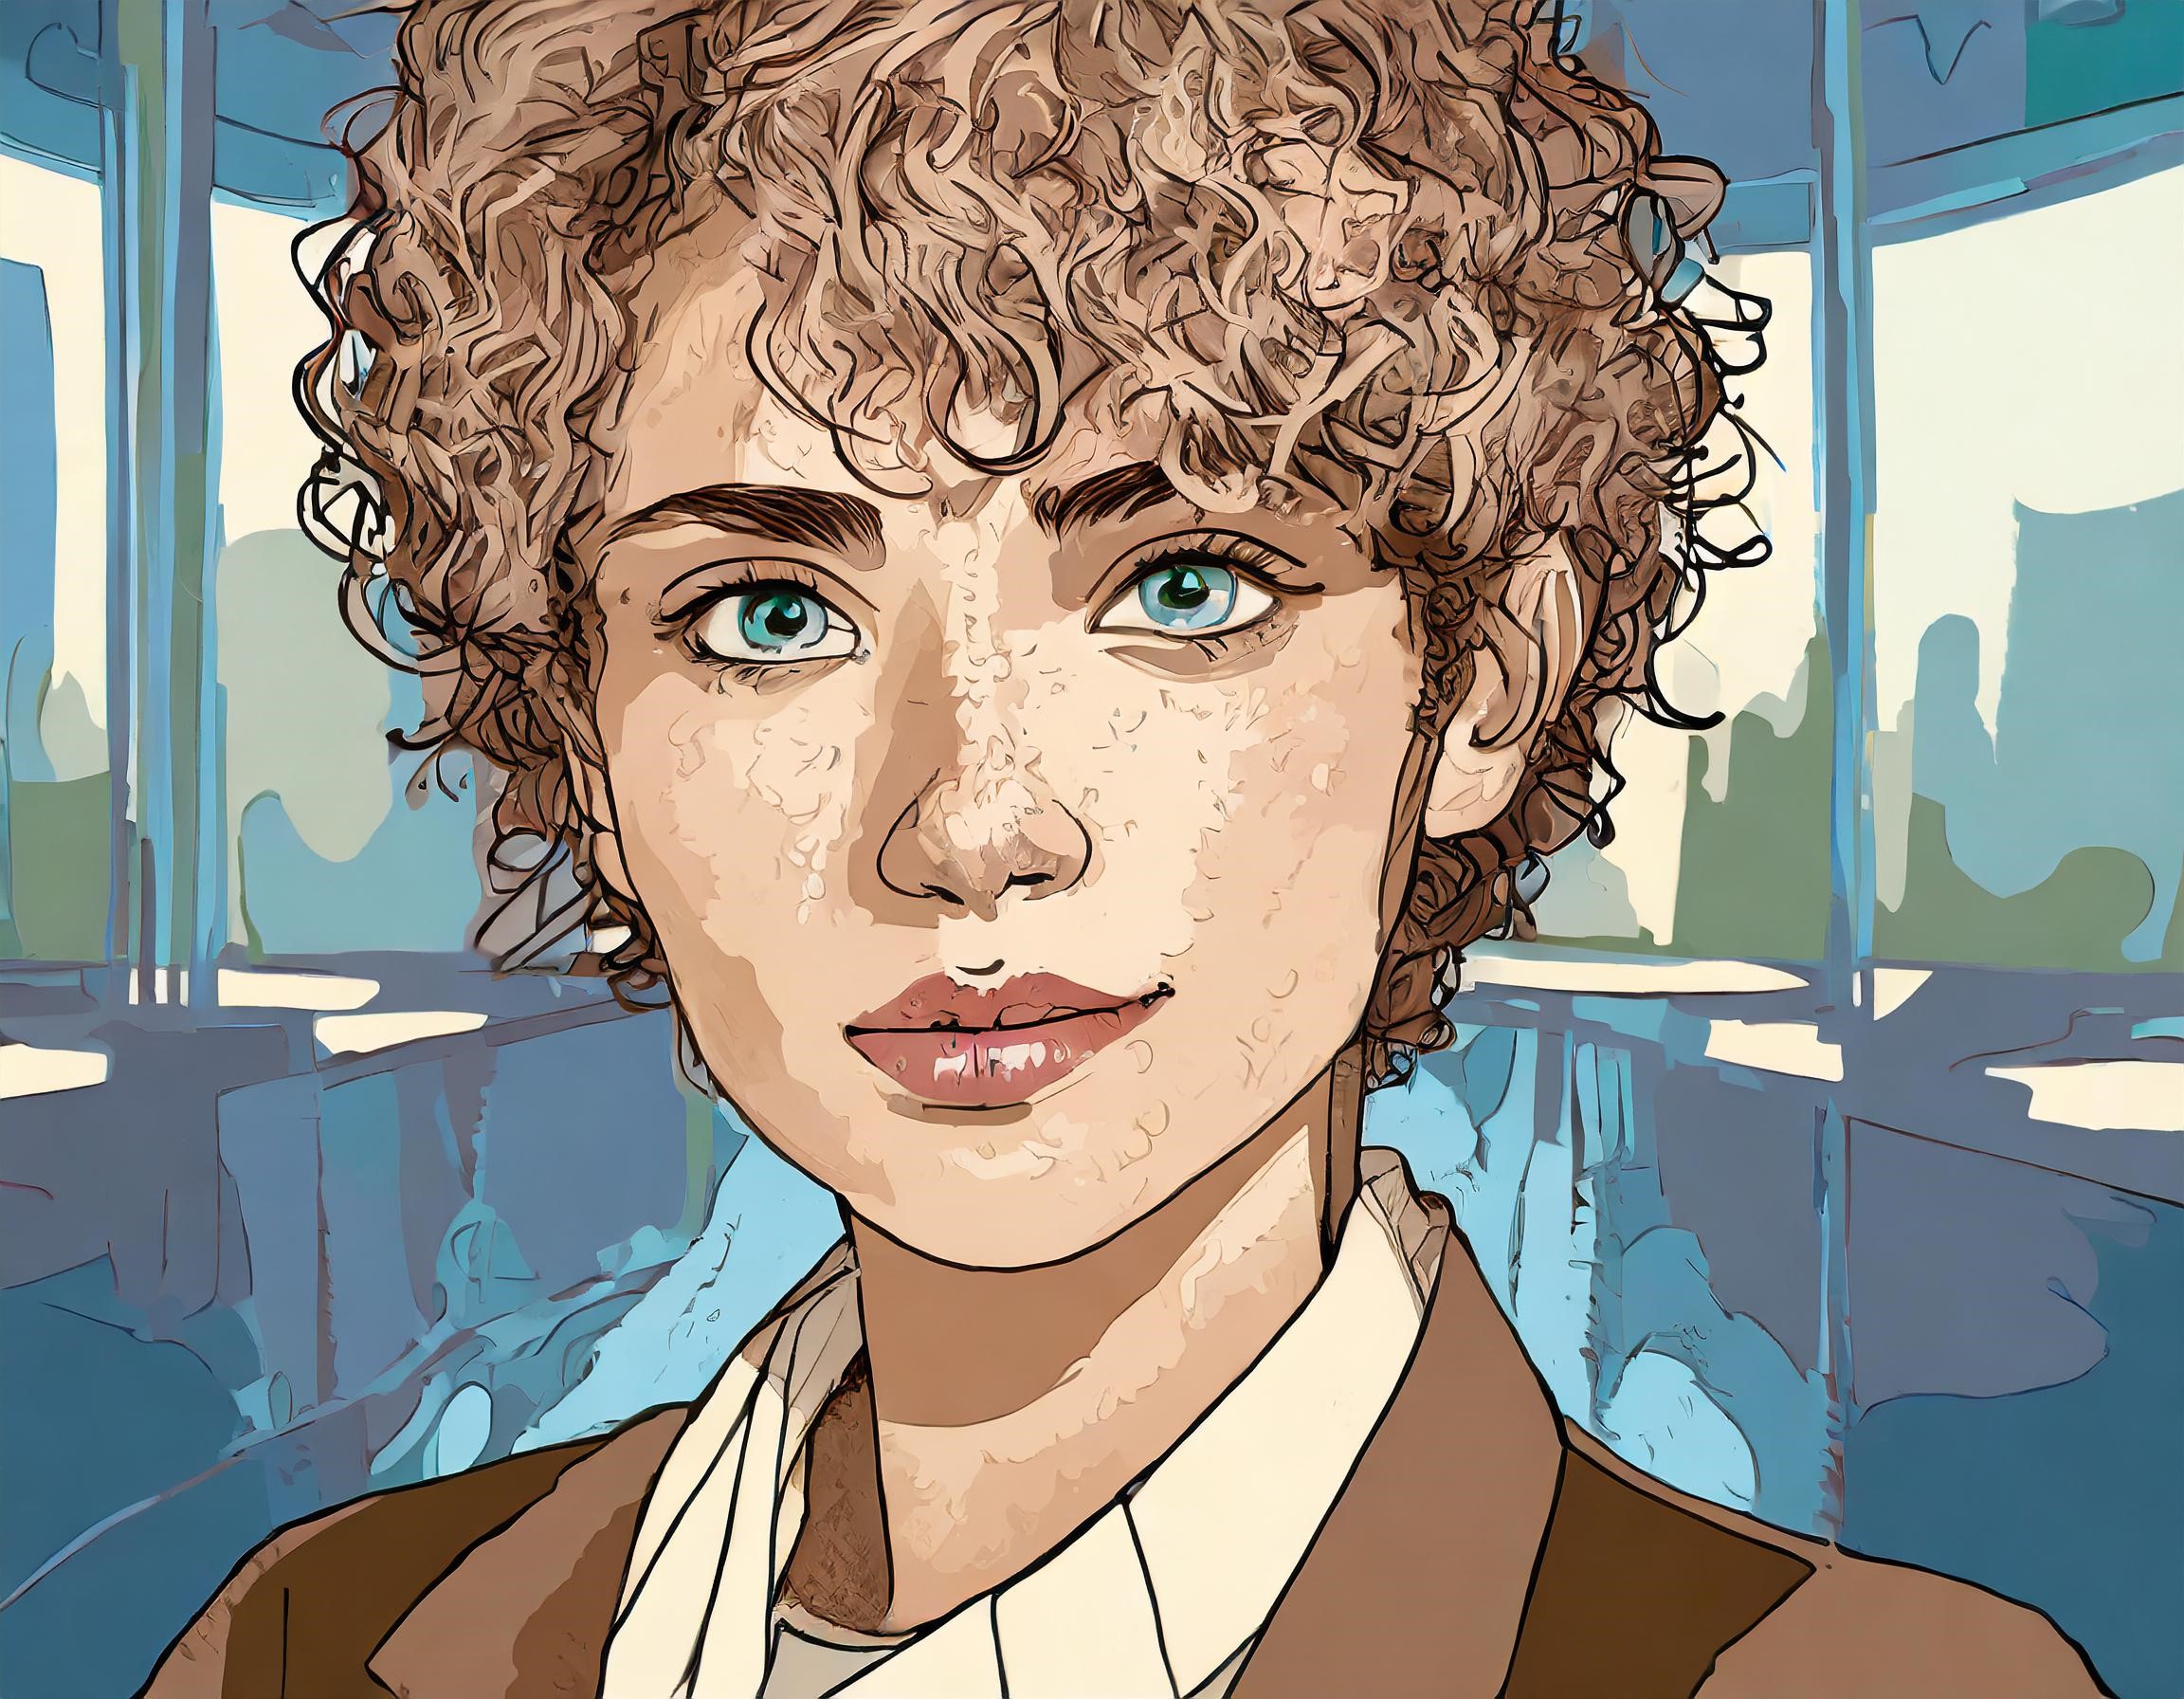 a drawing of a white androgynous looking woman with curly hair and blue eyes, wearing a brown coat, against a city skyline